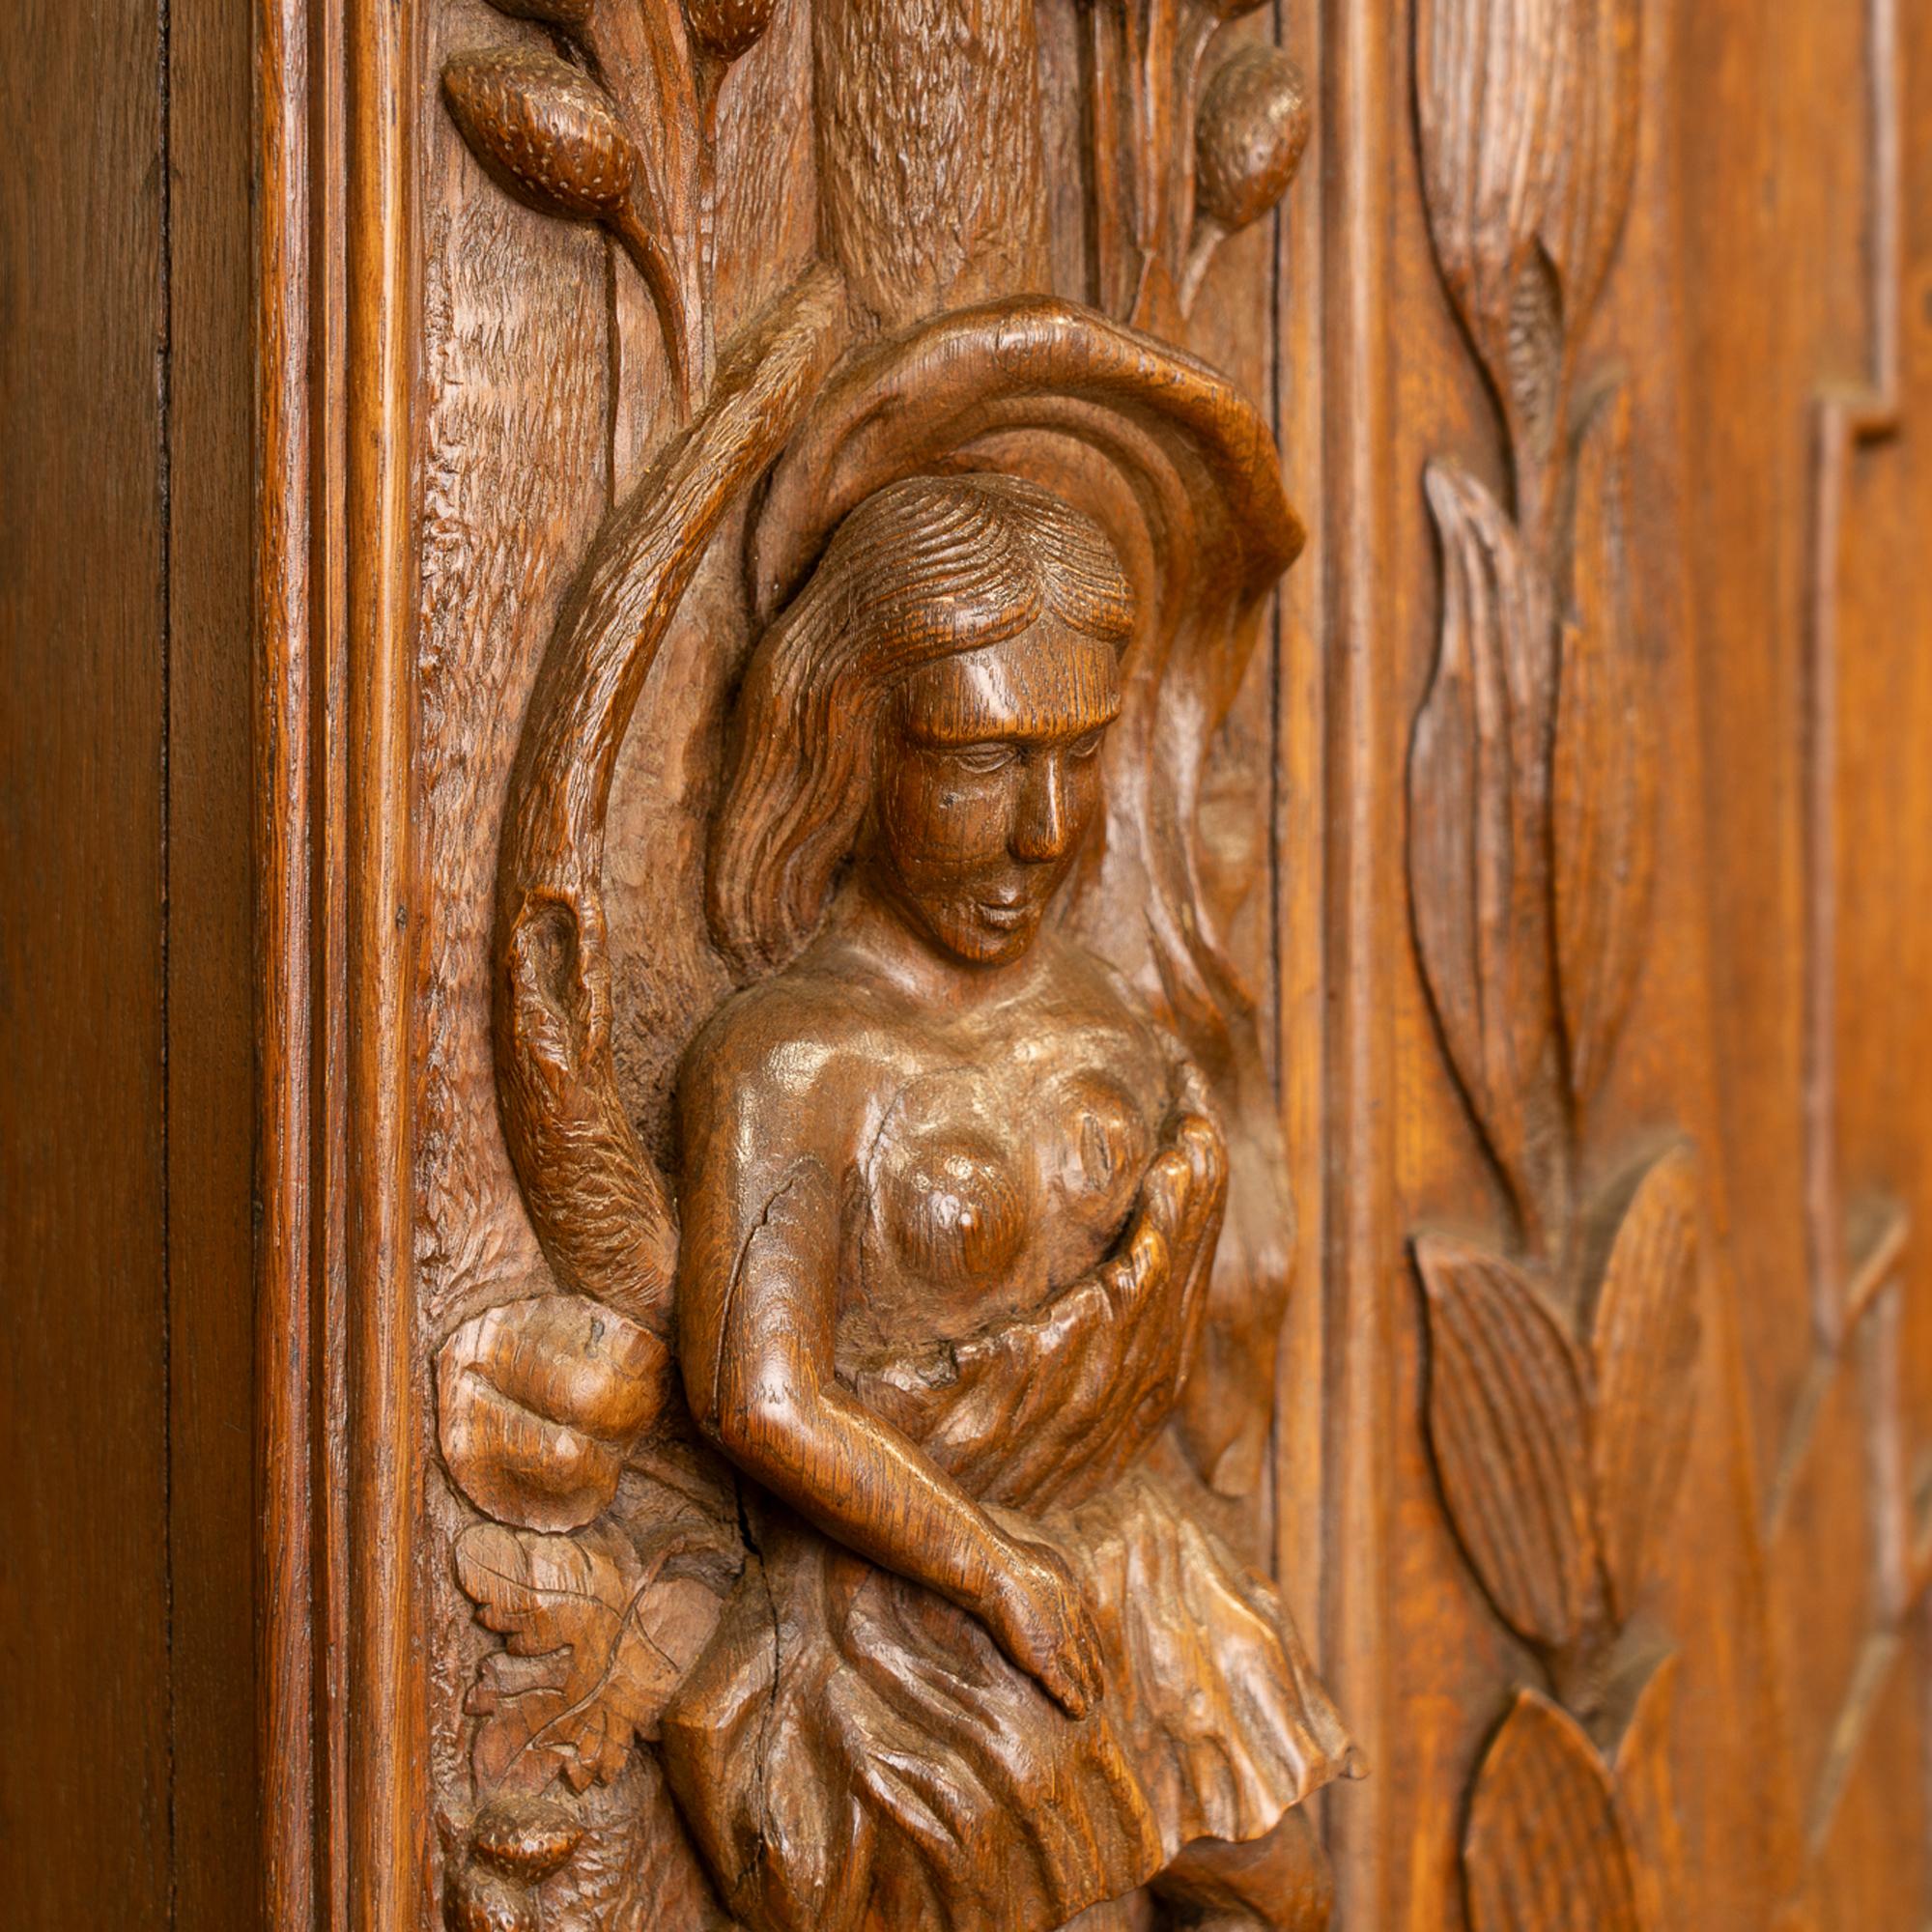 Large Heavily Carved Oak Armoire With Wrangel Family Crest, Sweden circa 1740-80 For Sale 2